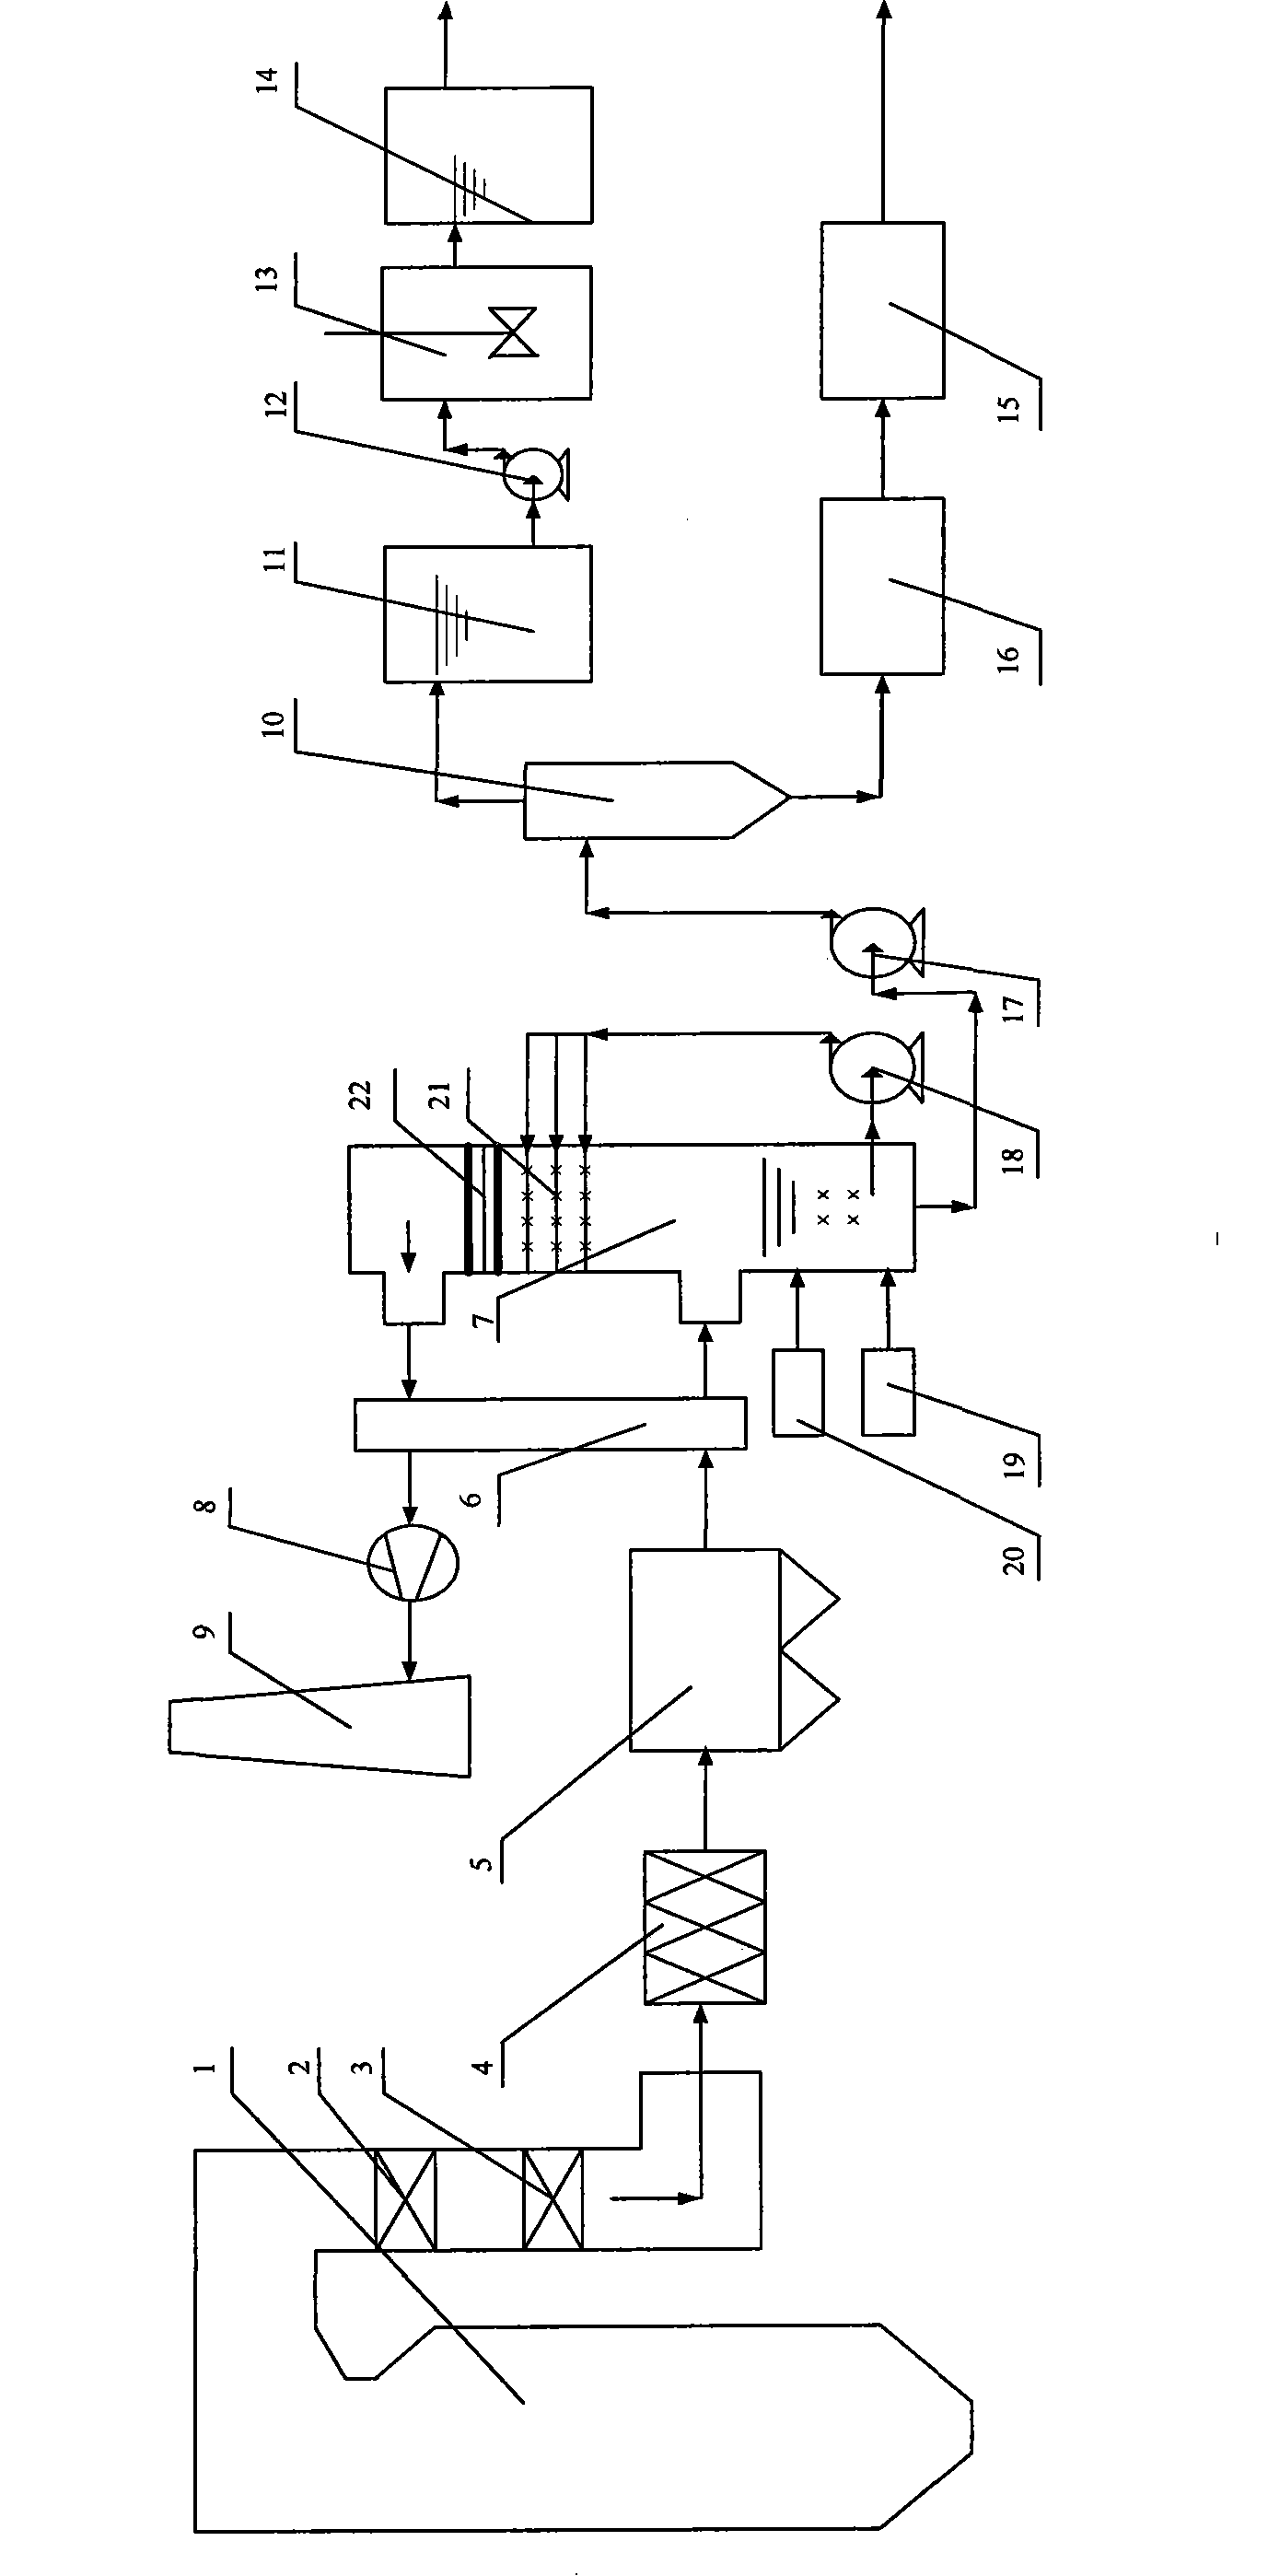 Wet-type ammonia flue gas purification technics for associated desulfuration demercuration and system